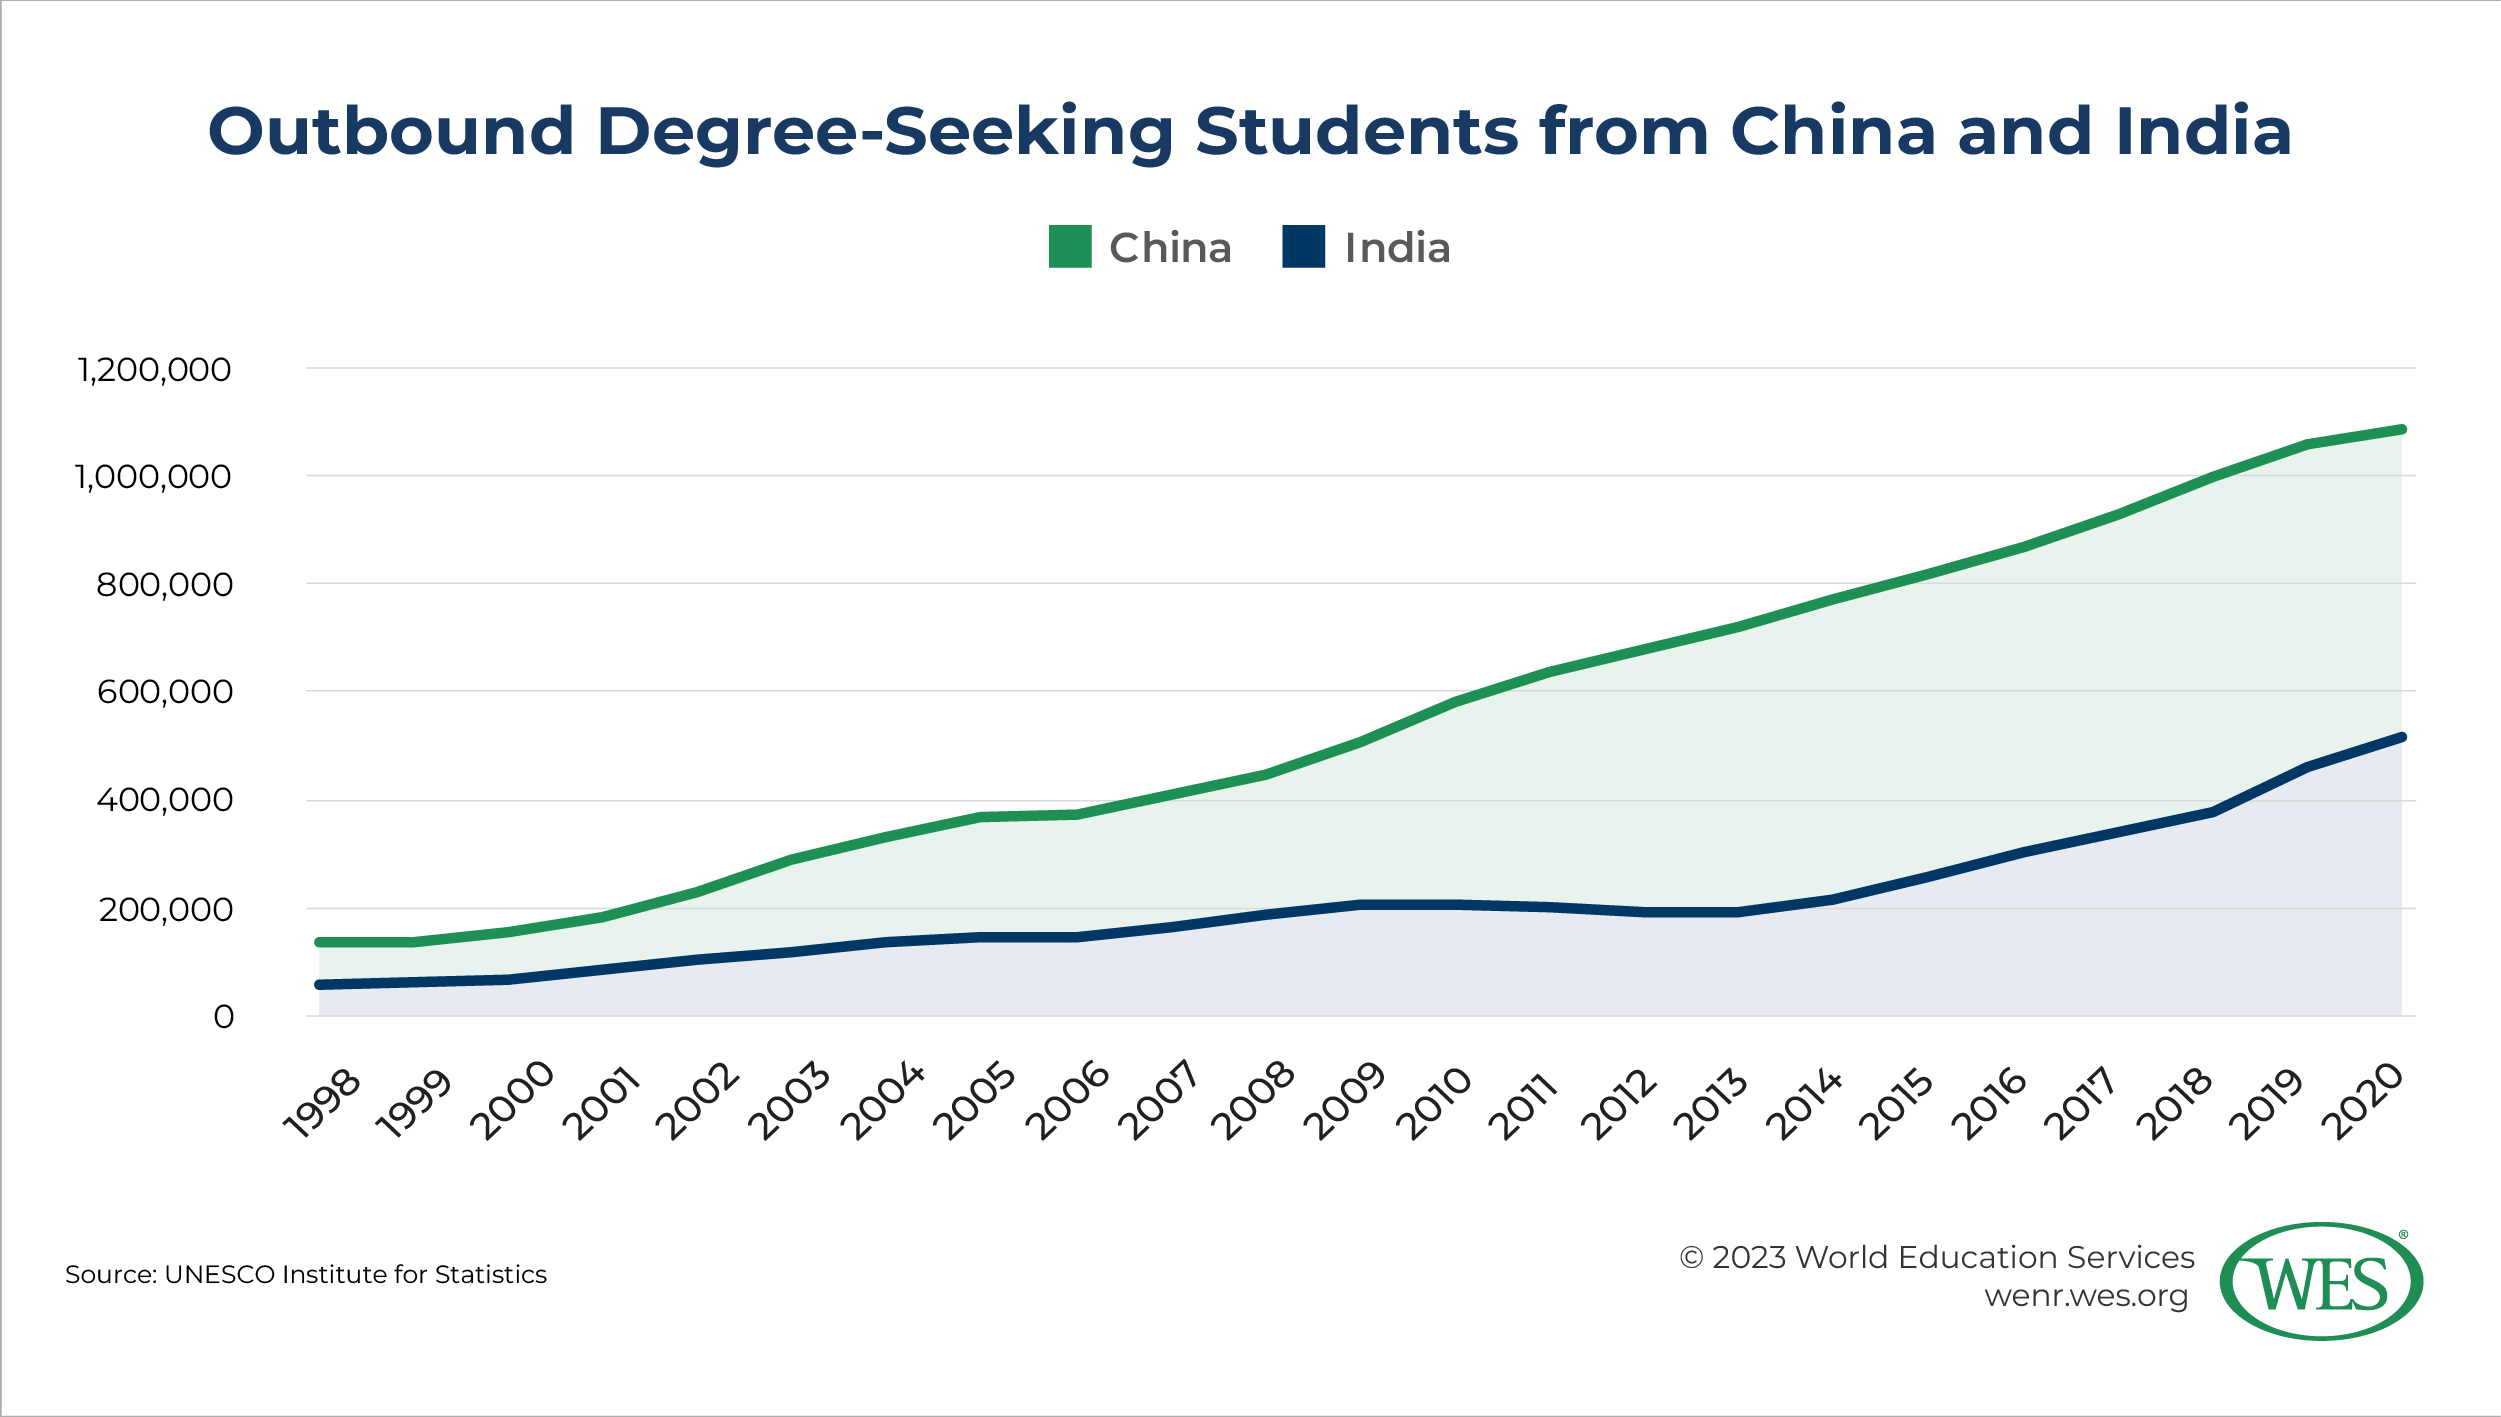 A chart showing the number of annual outbound degree-seeking students from China and India between 1998 and 2020. 